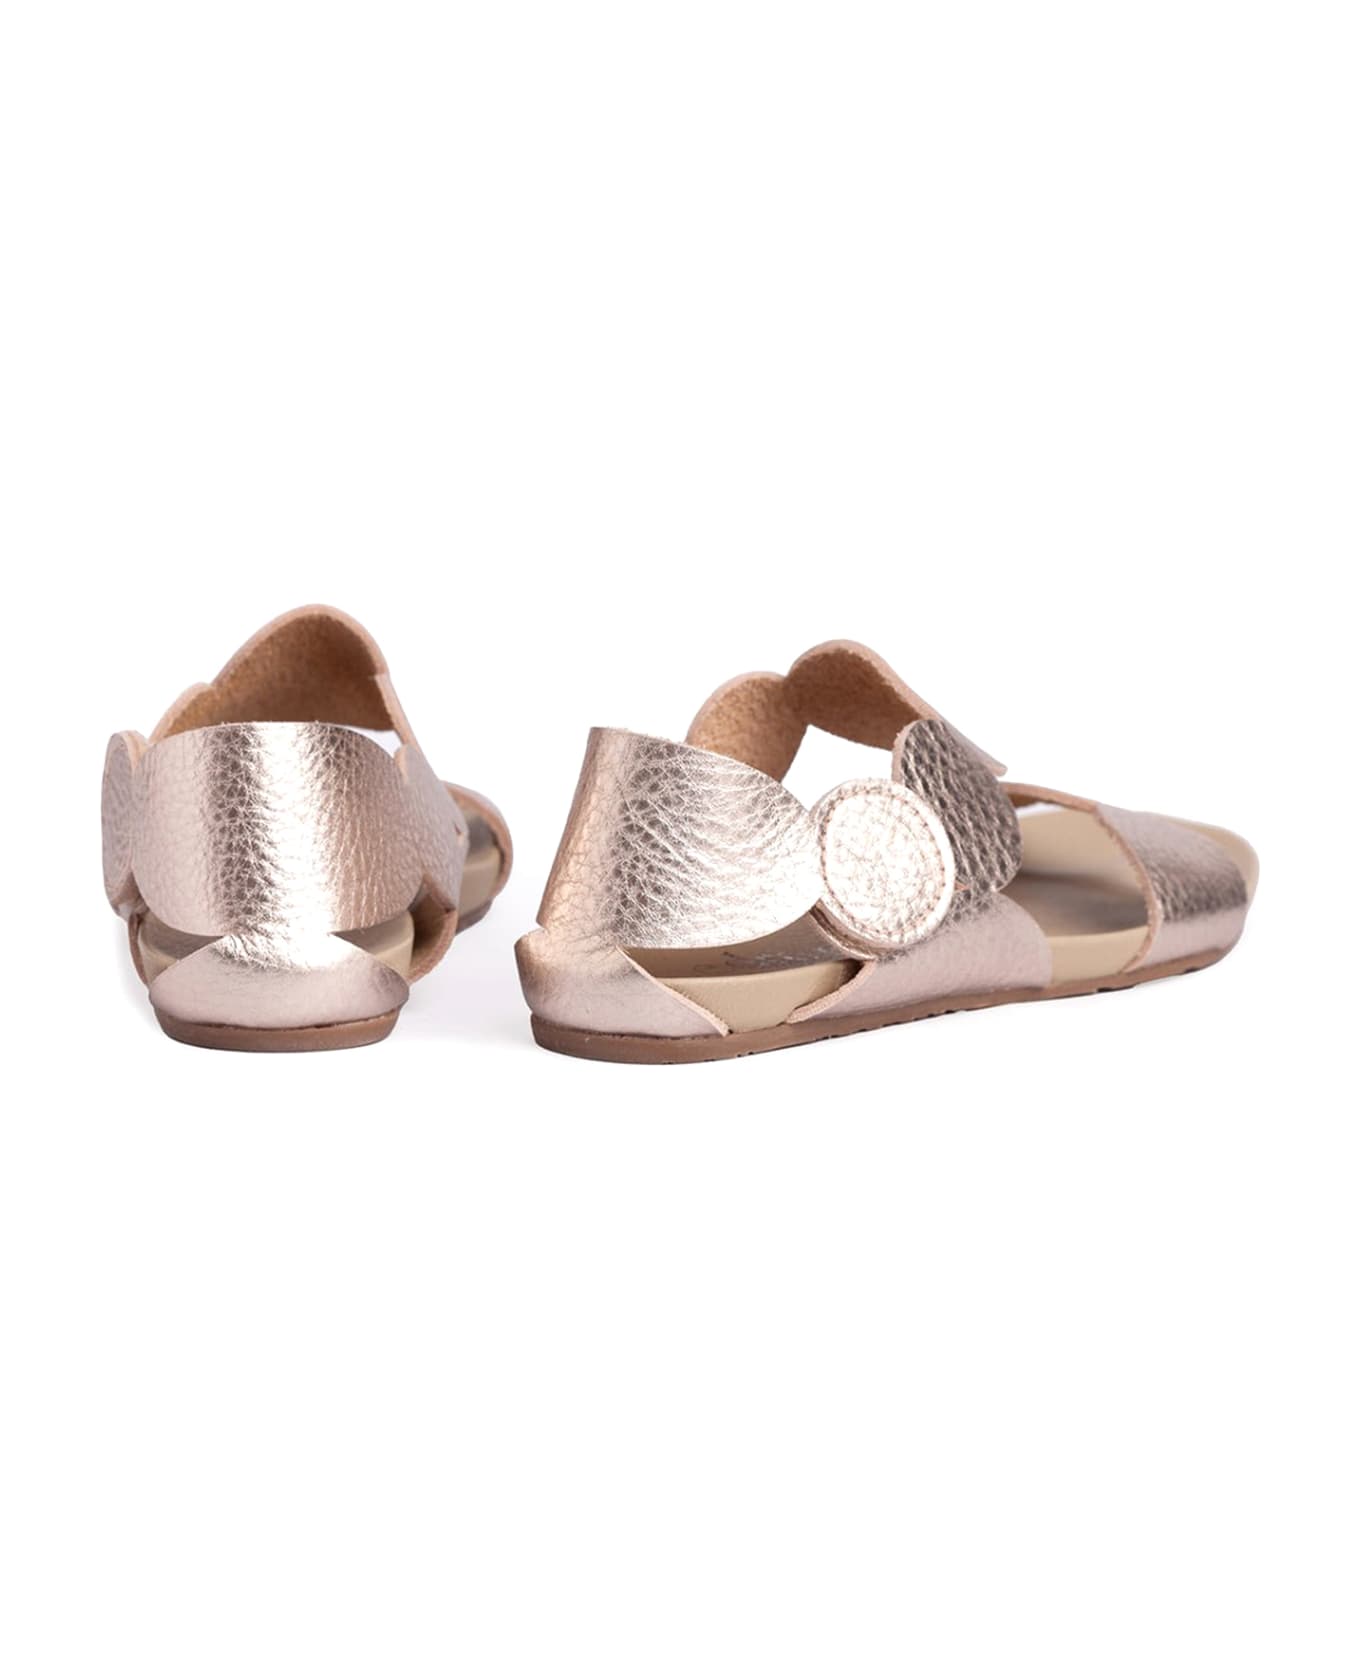 Pedro Garcia Jeanne Sandal In Laminated Grained Leather - SIROCCO